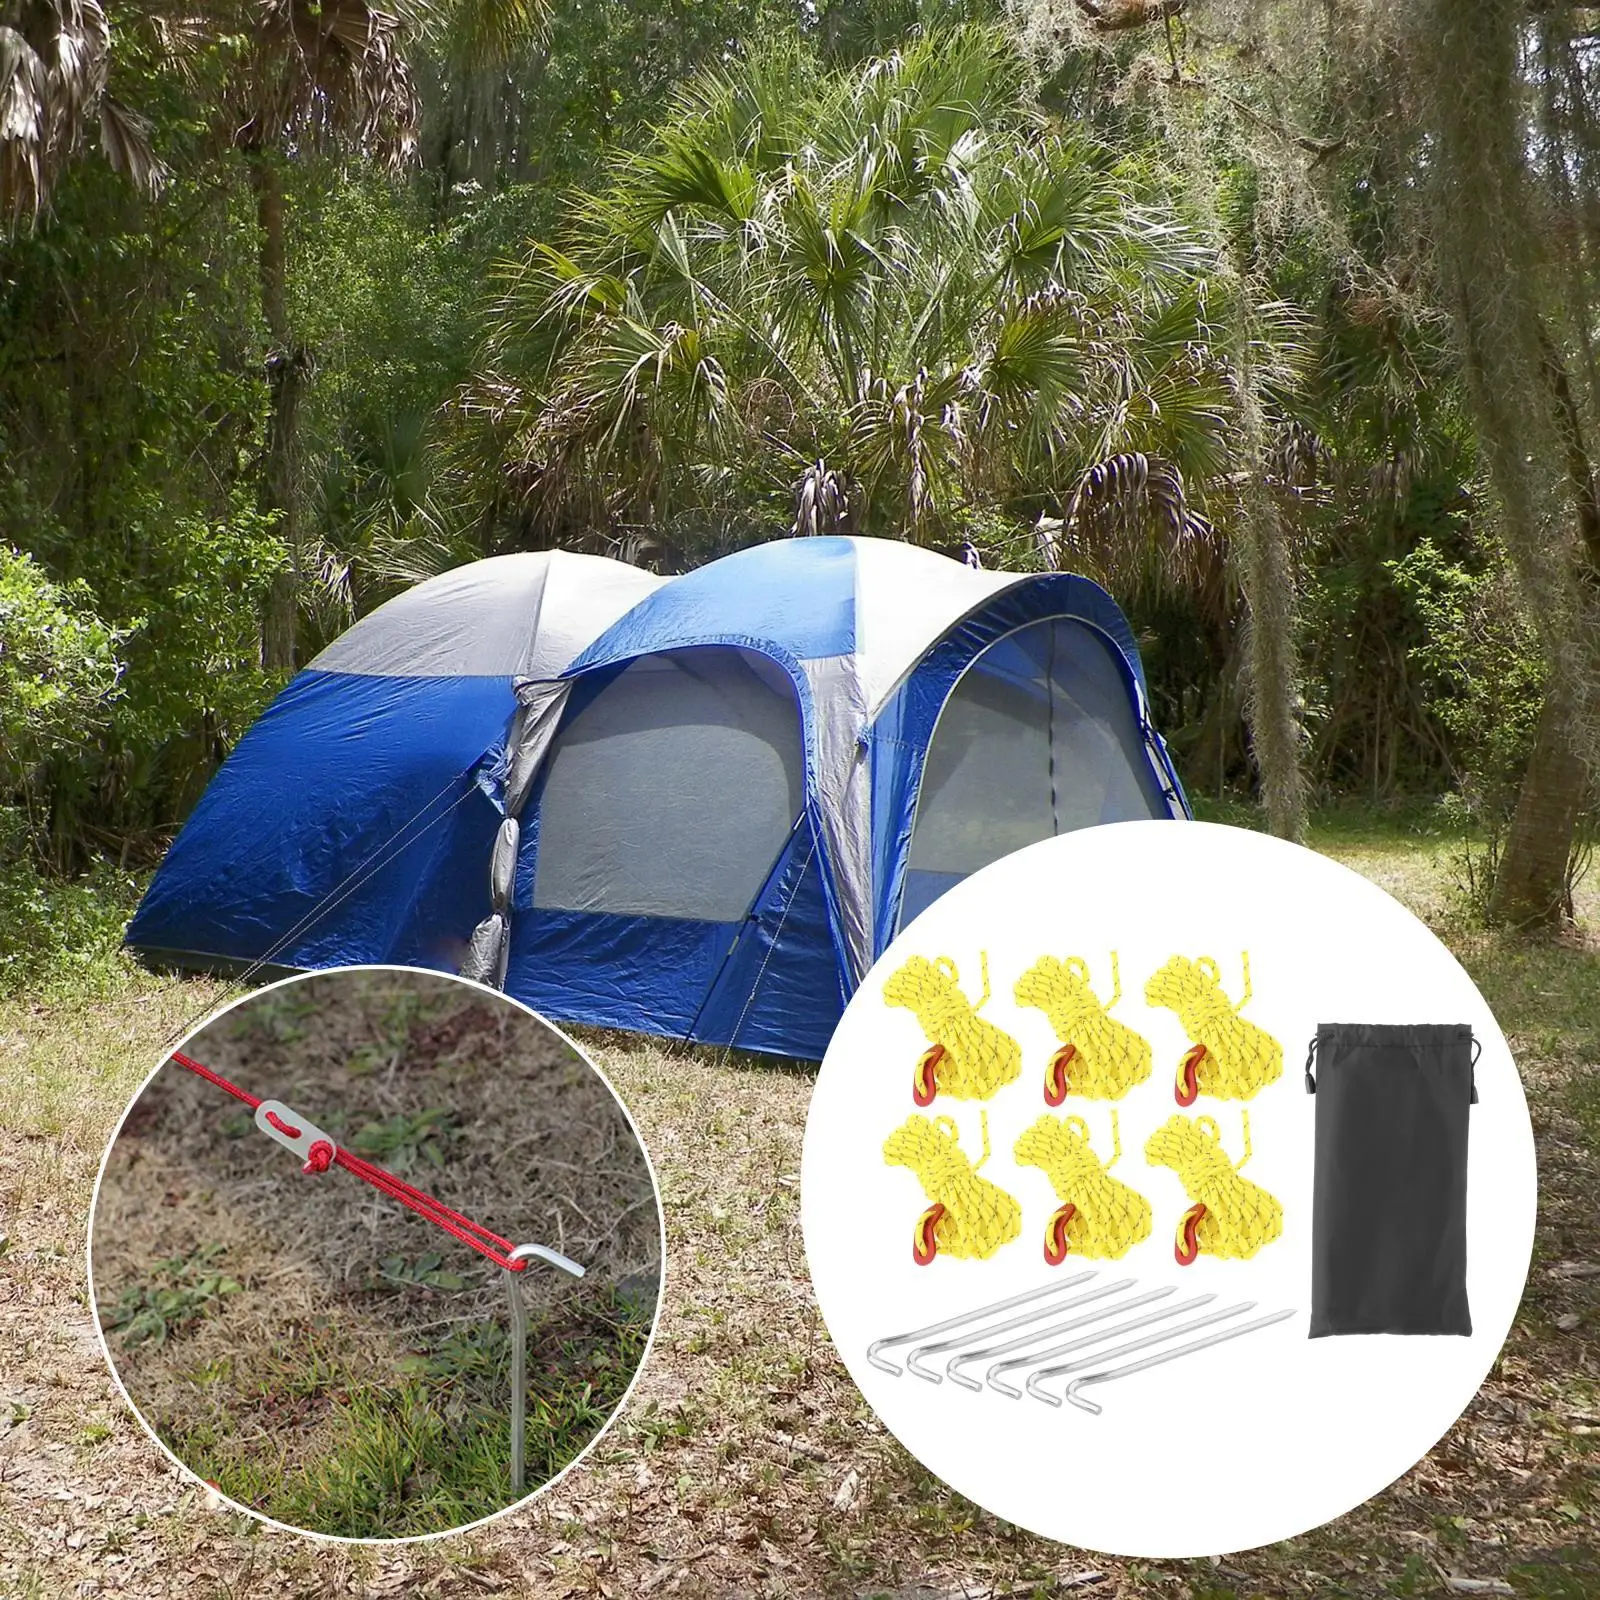 6Pcs/Pack Guy Lines Tent Cord Kit with Storage Bag for Tying Down Tarps